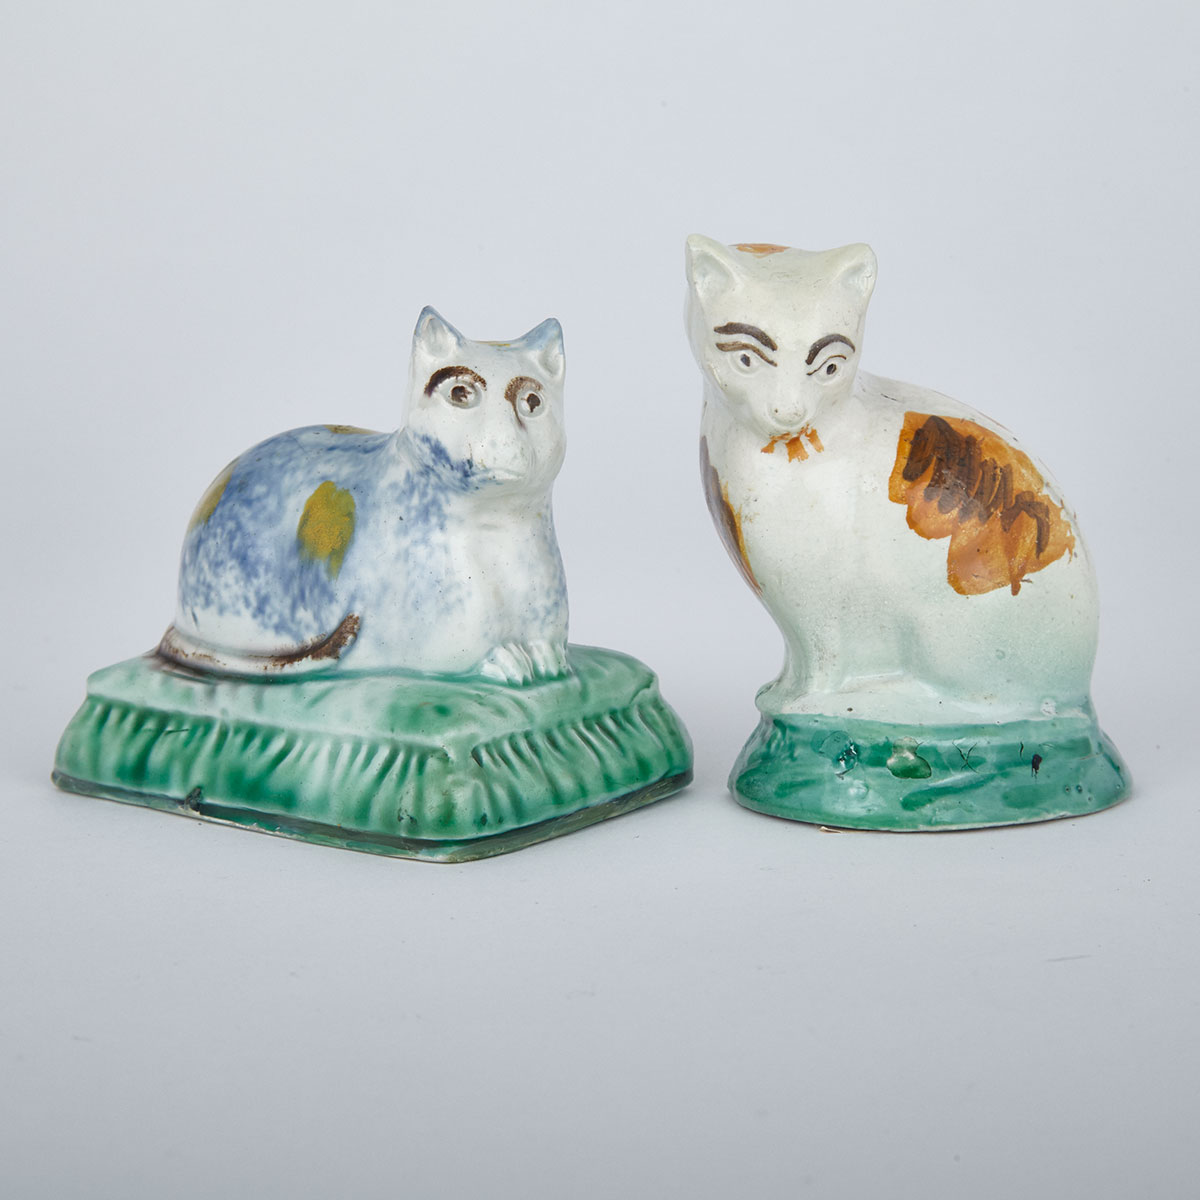 English Pearlware Model of a Cat and a Pratt Ware Cat, c.1800-10